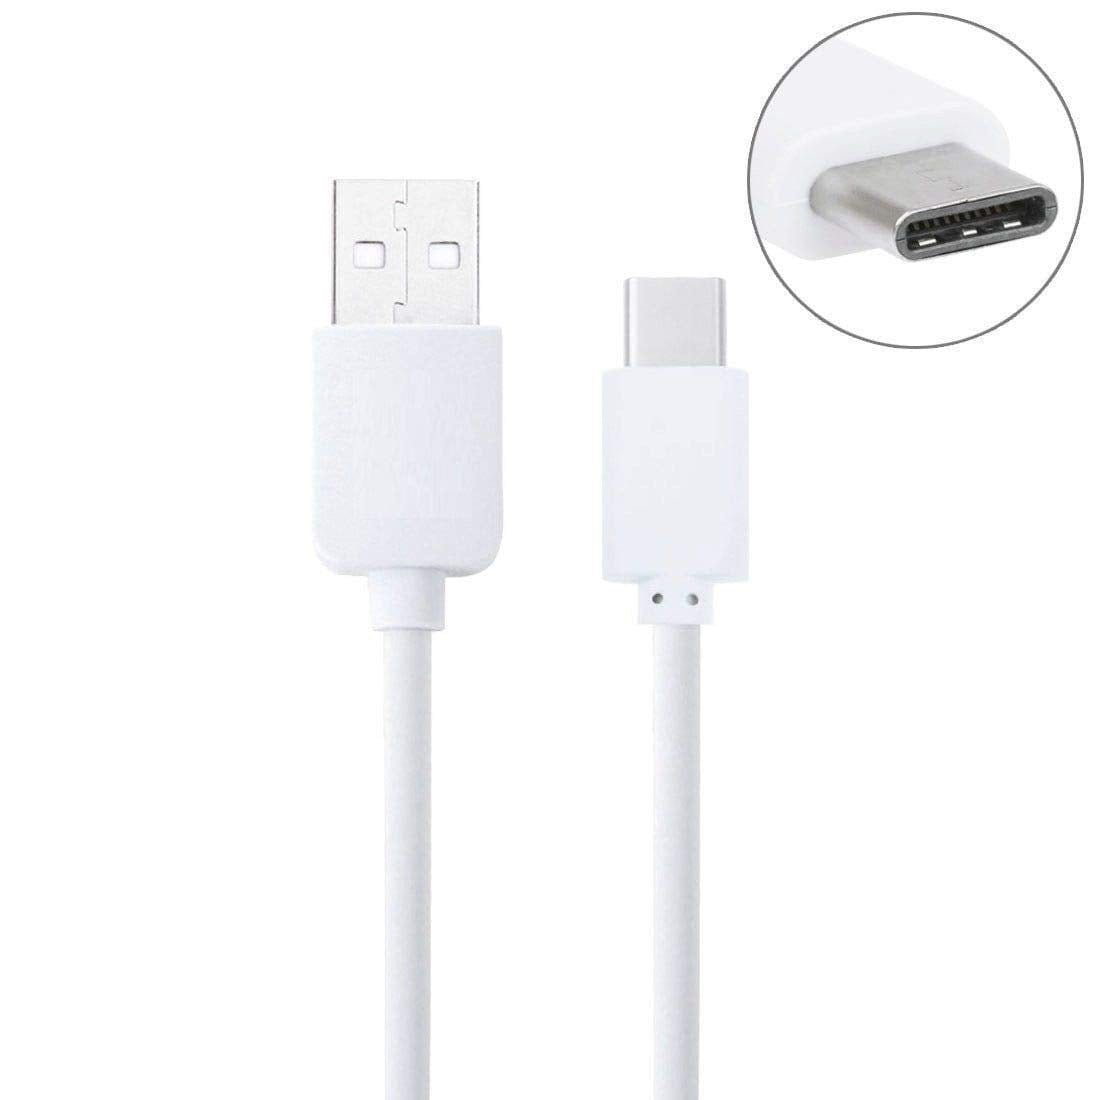 Samsung Galaxy A70 USB to Type C Charging Cable Lead White - 1M - SmartPhoneGadgetUK